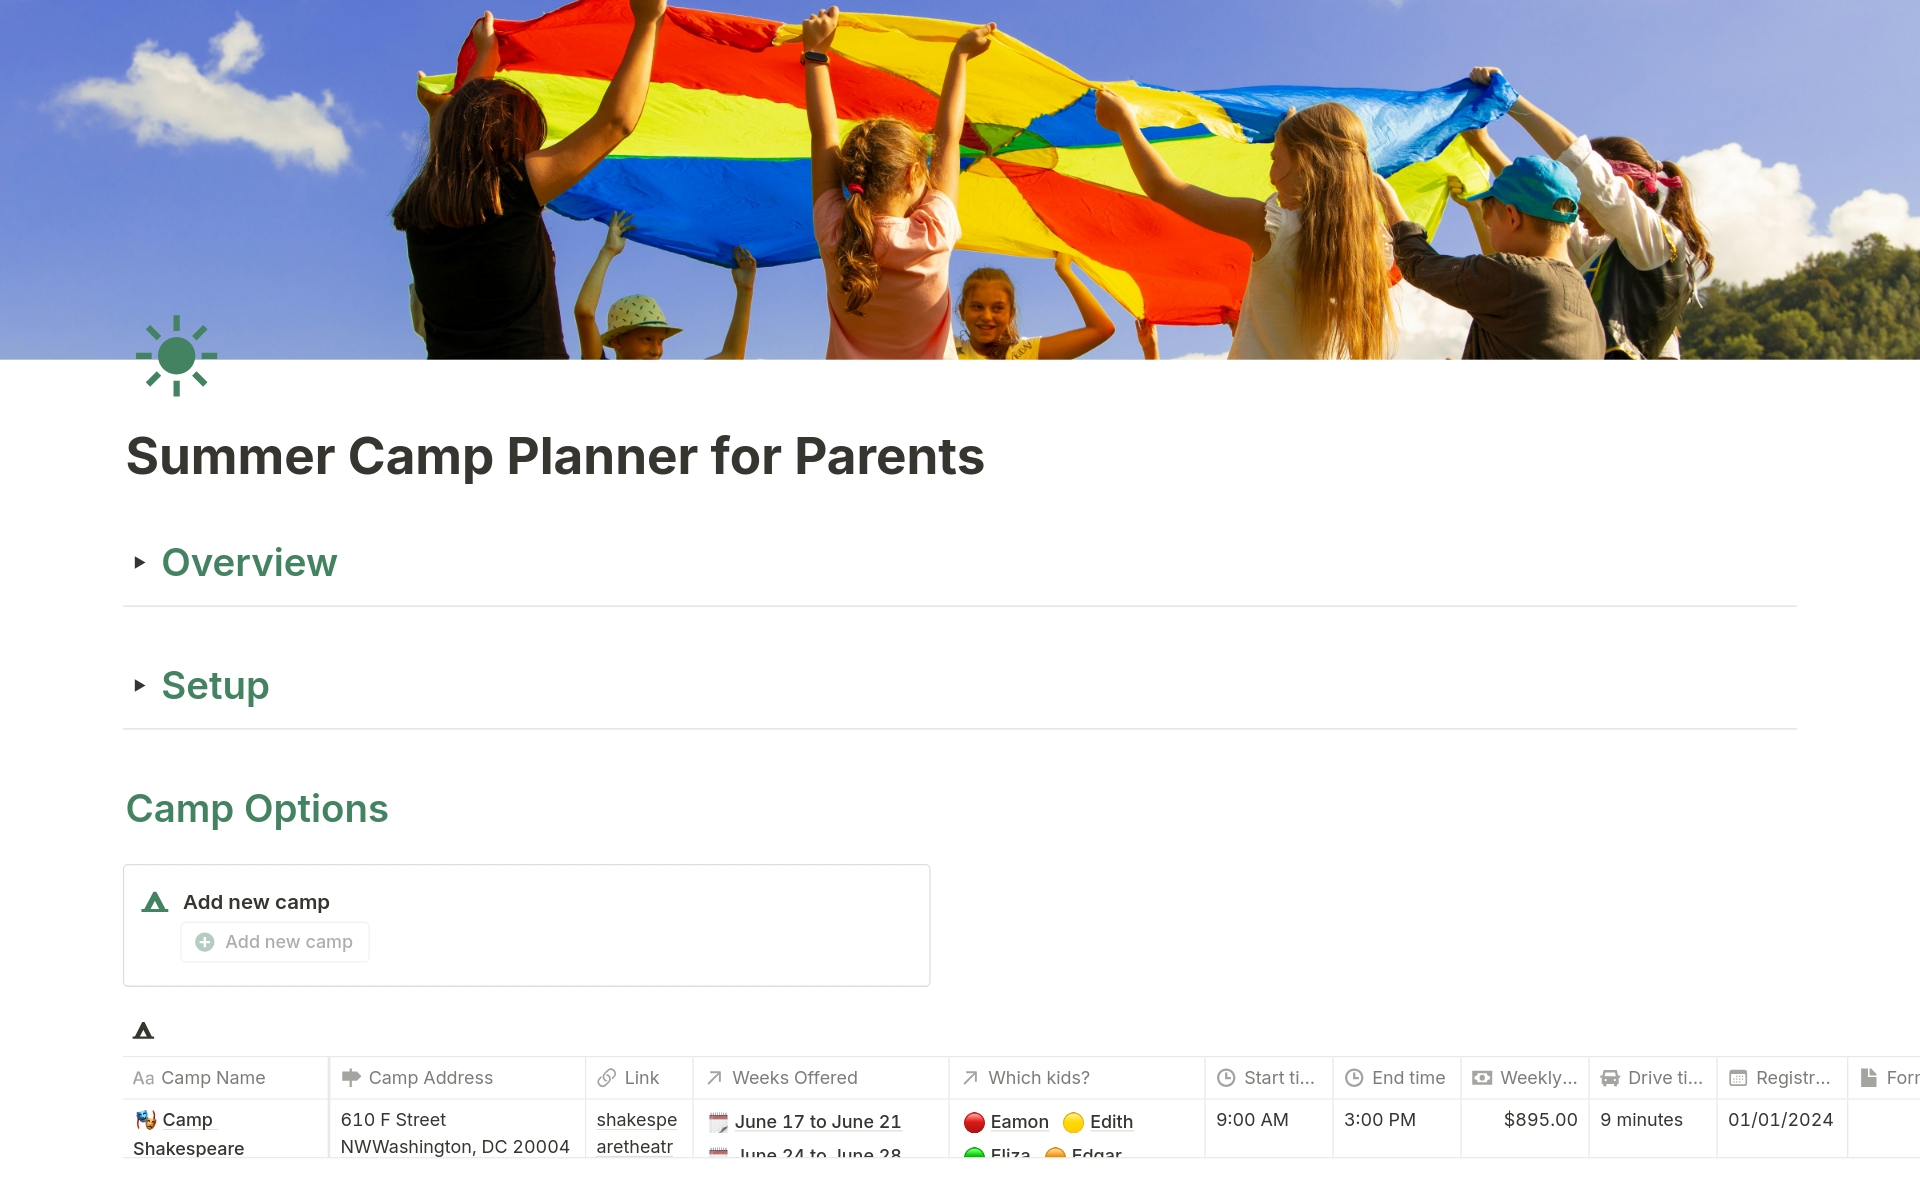 Do you have school-aged children? Need to line up a summer camp schedule for your family? This template can help make it easier...and maybe even fun.